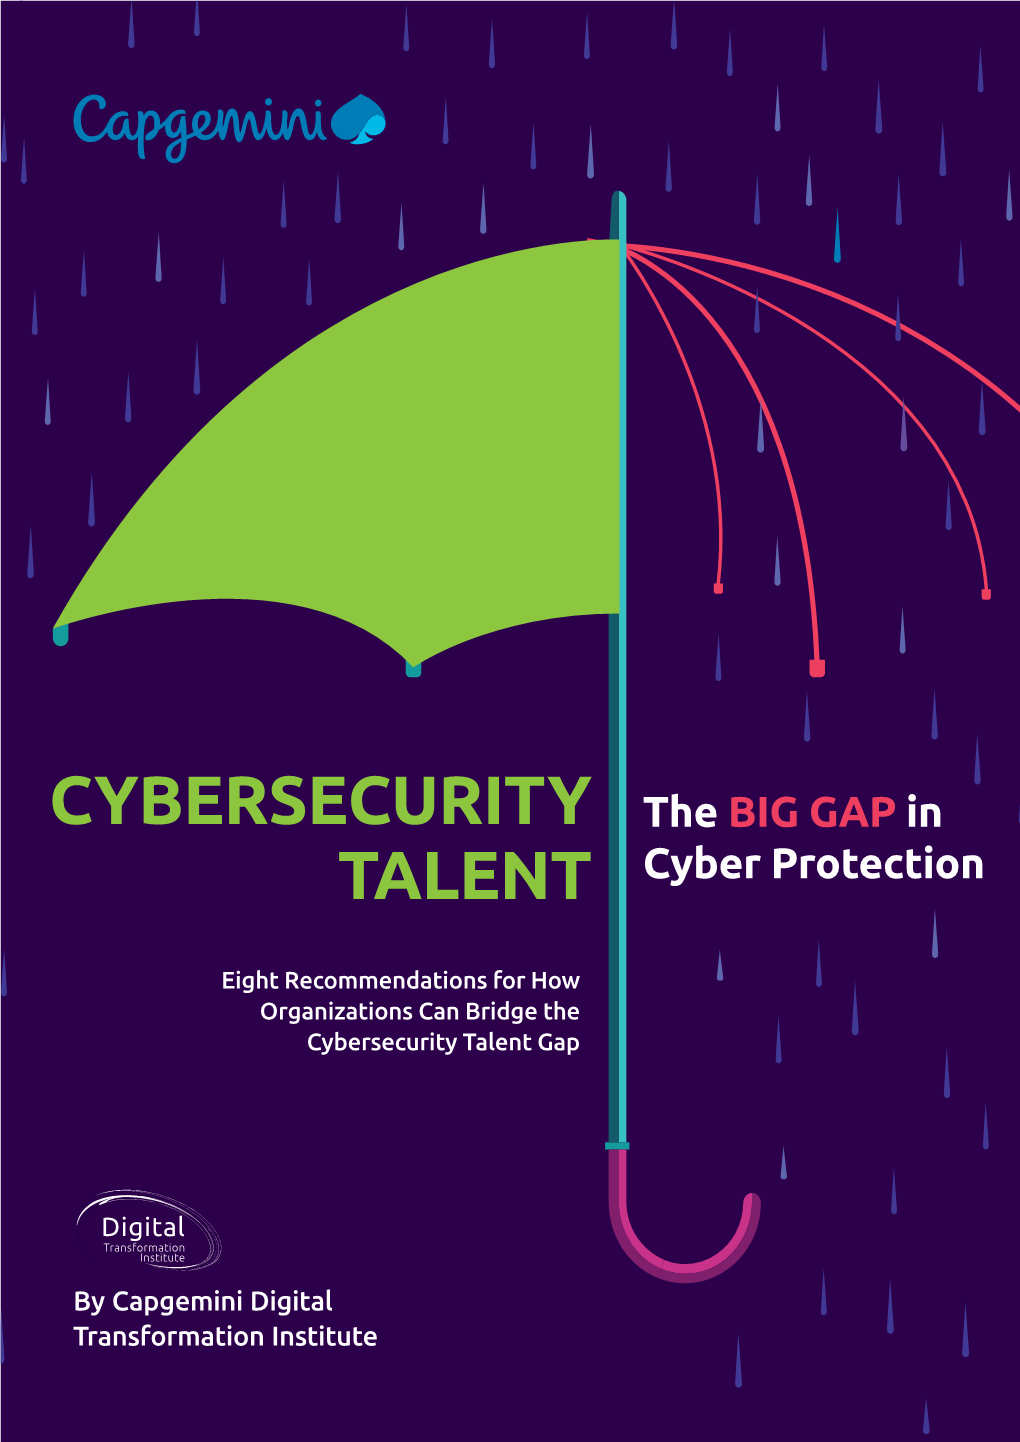 Profile of Cybersecurity Talent” Provides More Detail on Their Defining Characteristics